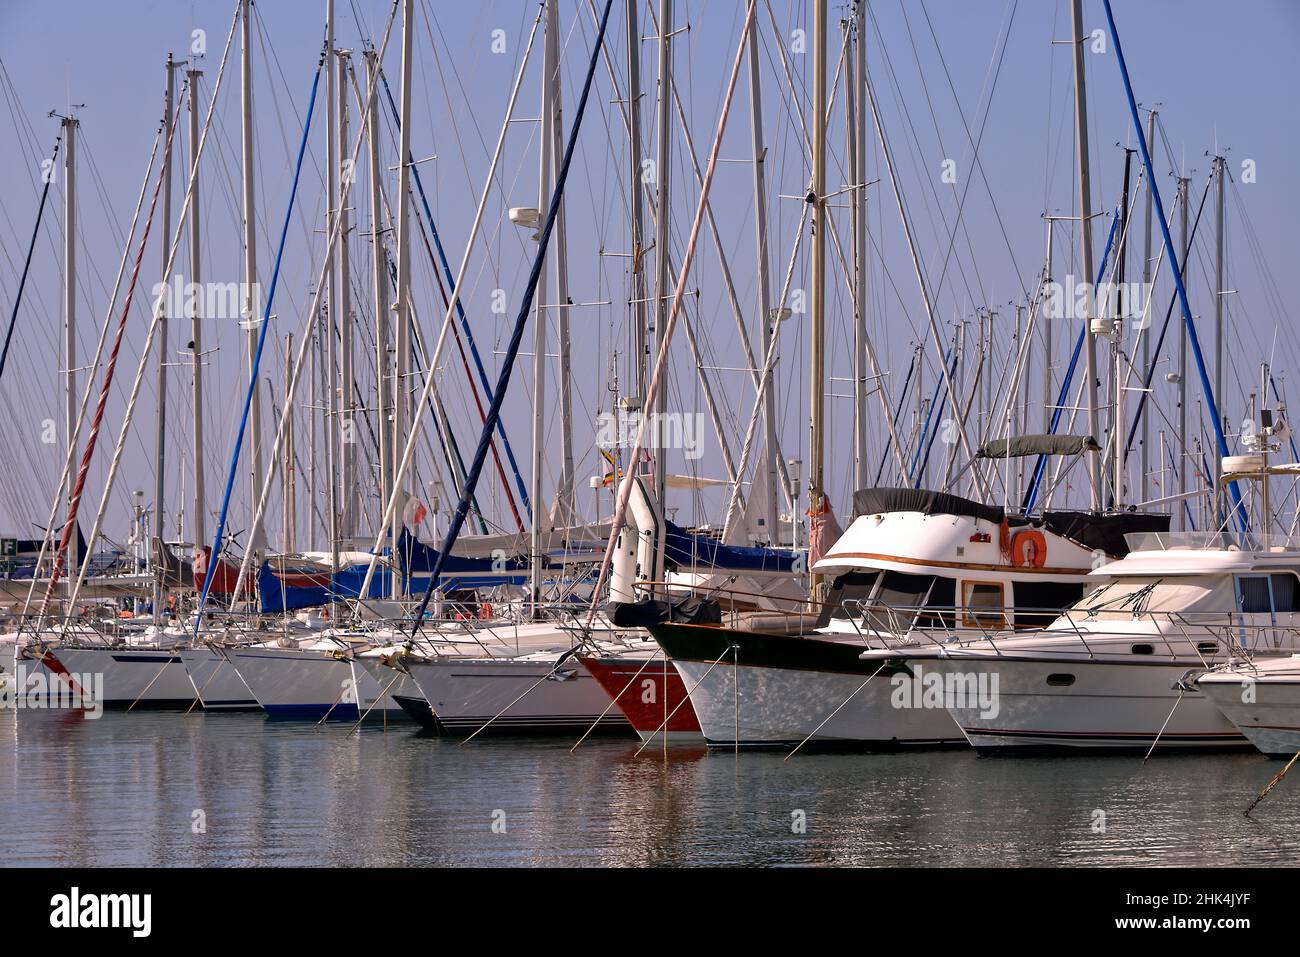 Marina of Golfe-Juan, commune of the Alpes-Maritimes department, which belongs in turn to the Provence-Alpes-Côte d'Azur region of France Stock Photo